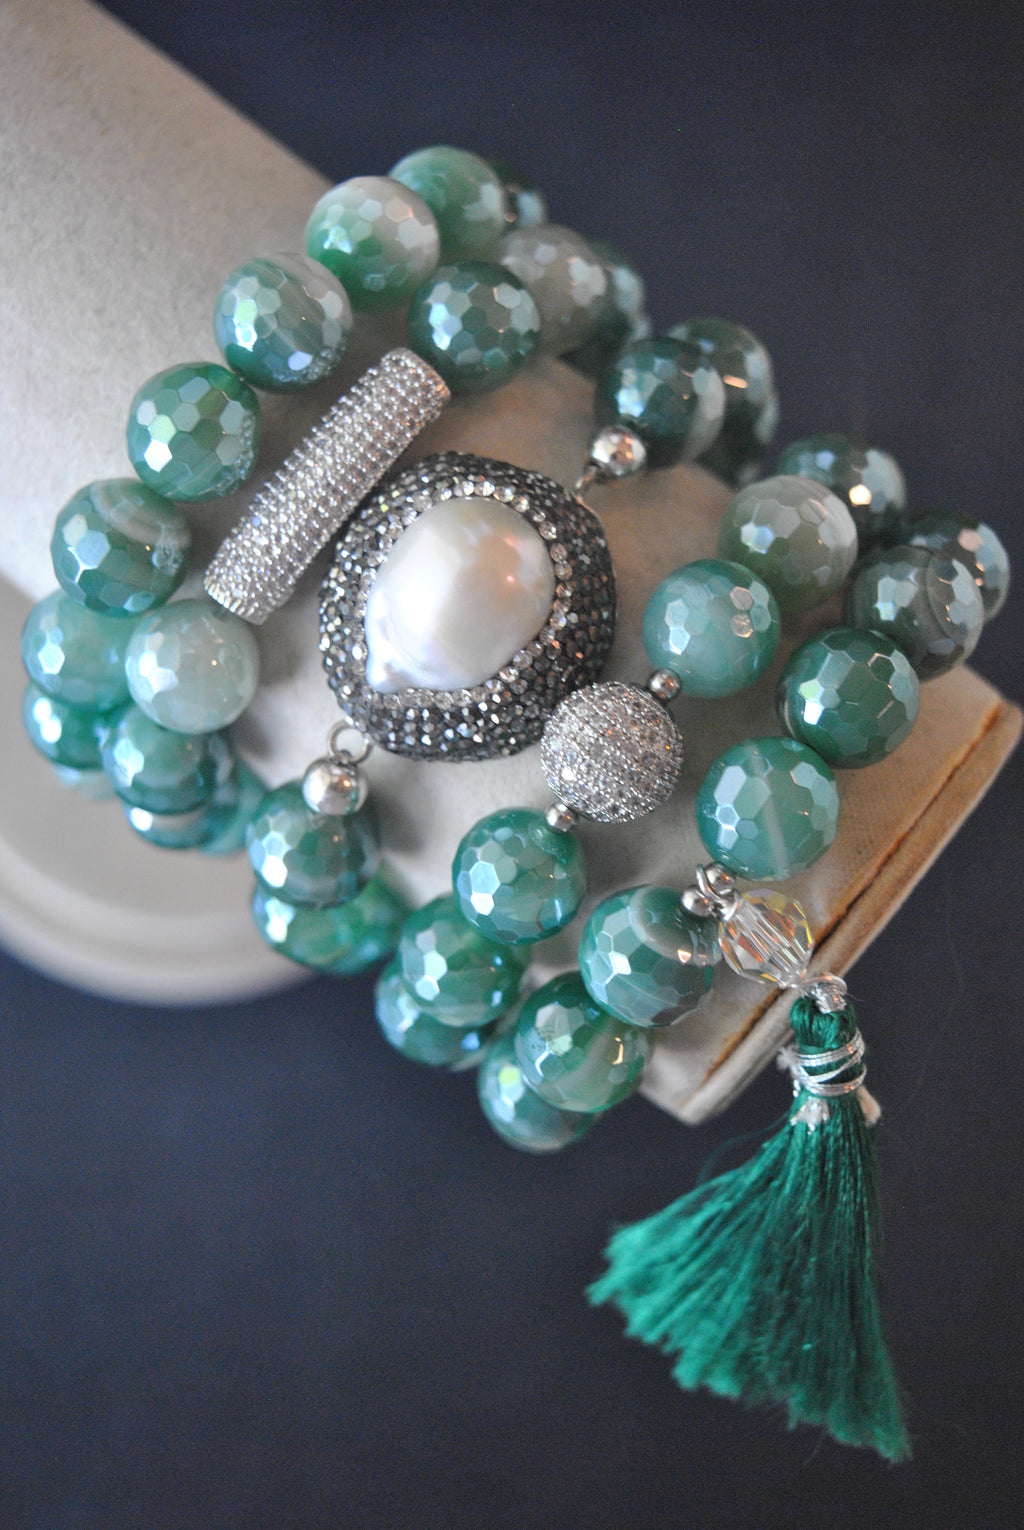 GREEN AGATE WITH ELECTROPLAITED COVER STRETCHY BRACELETS